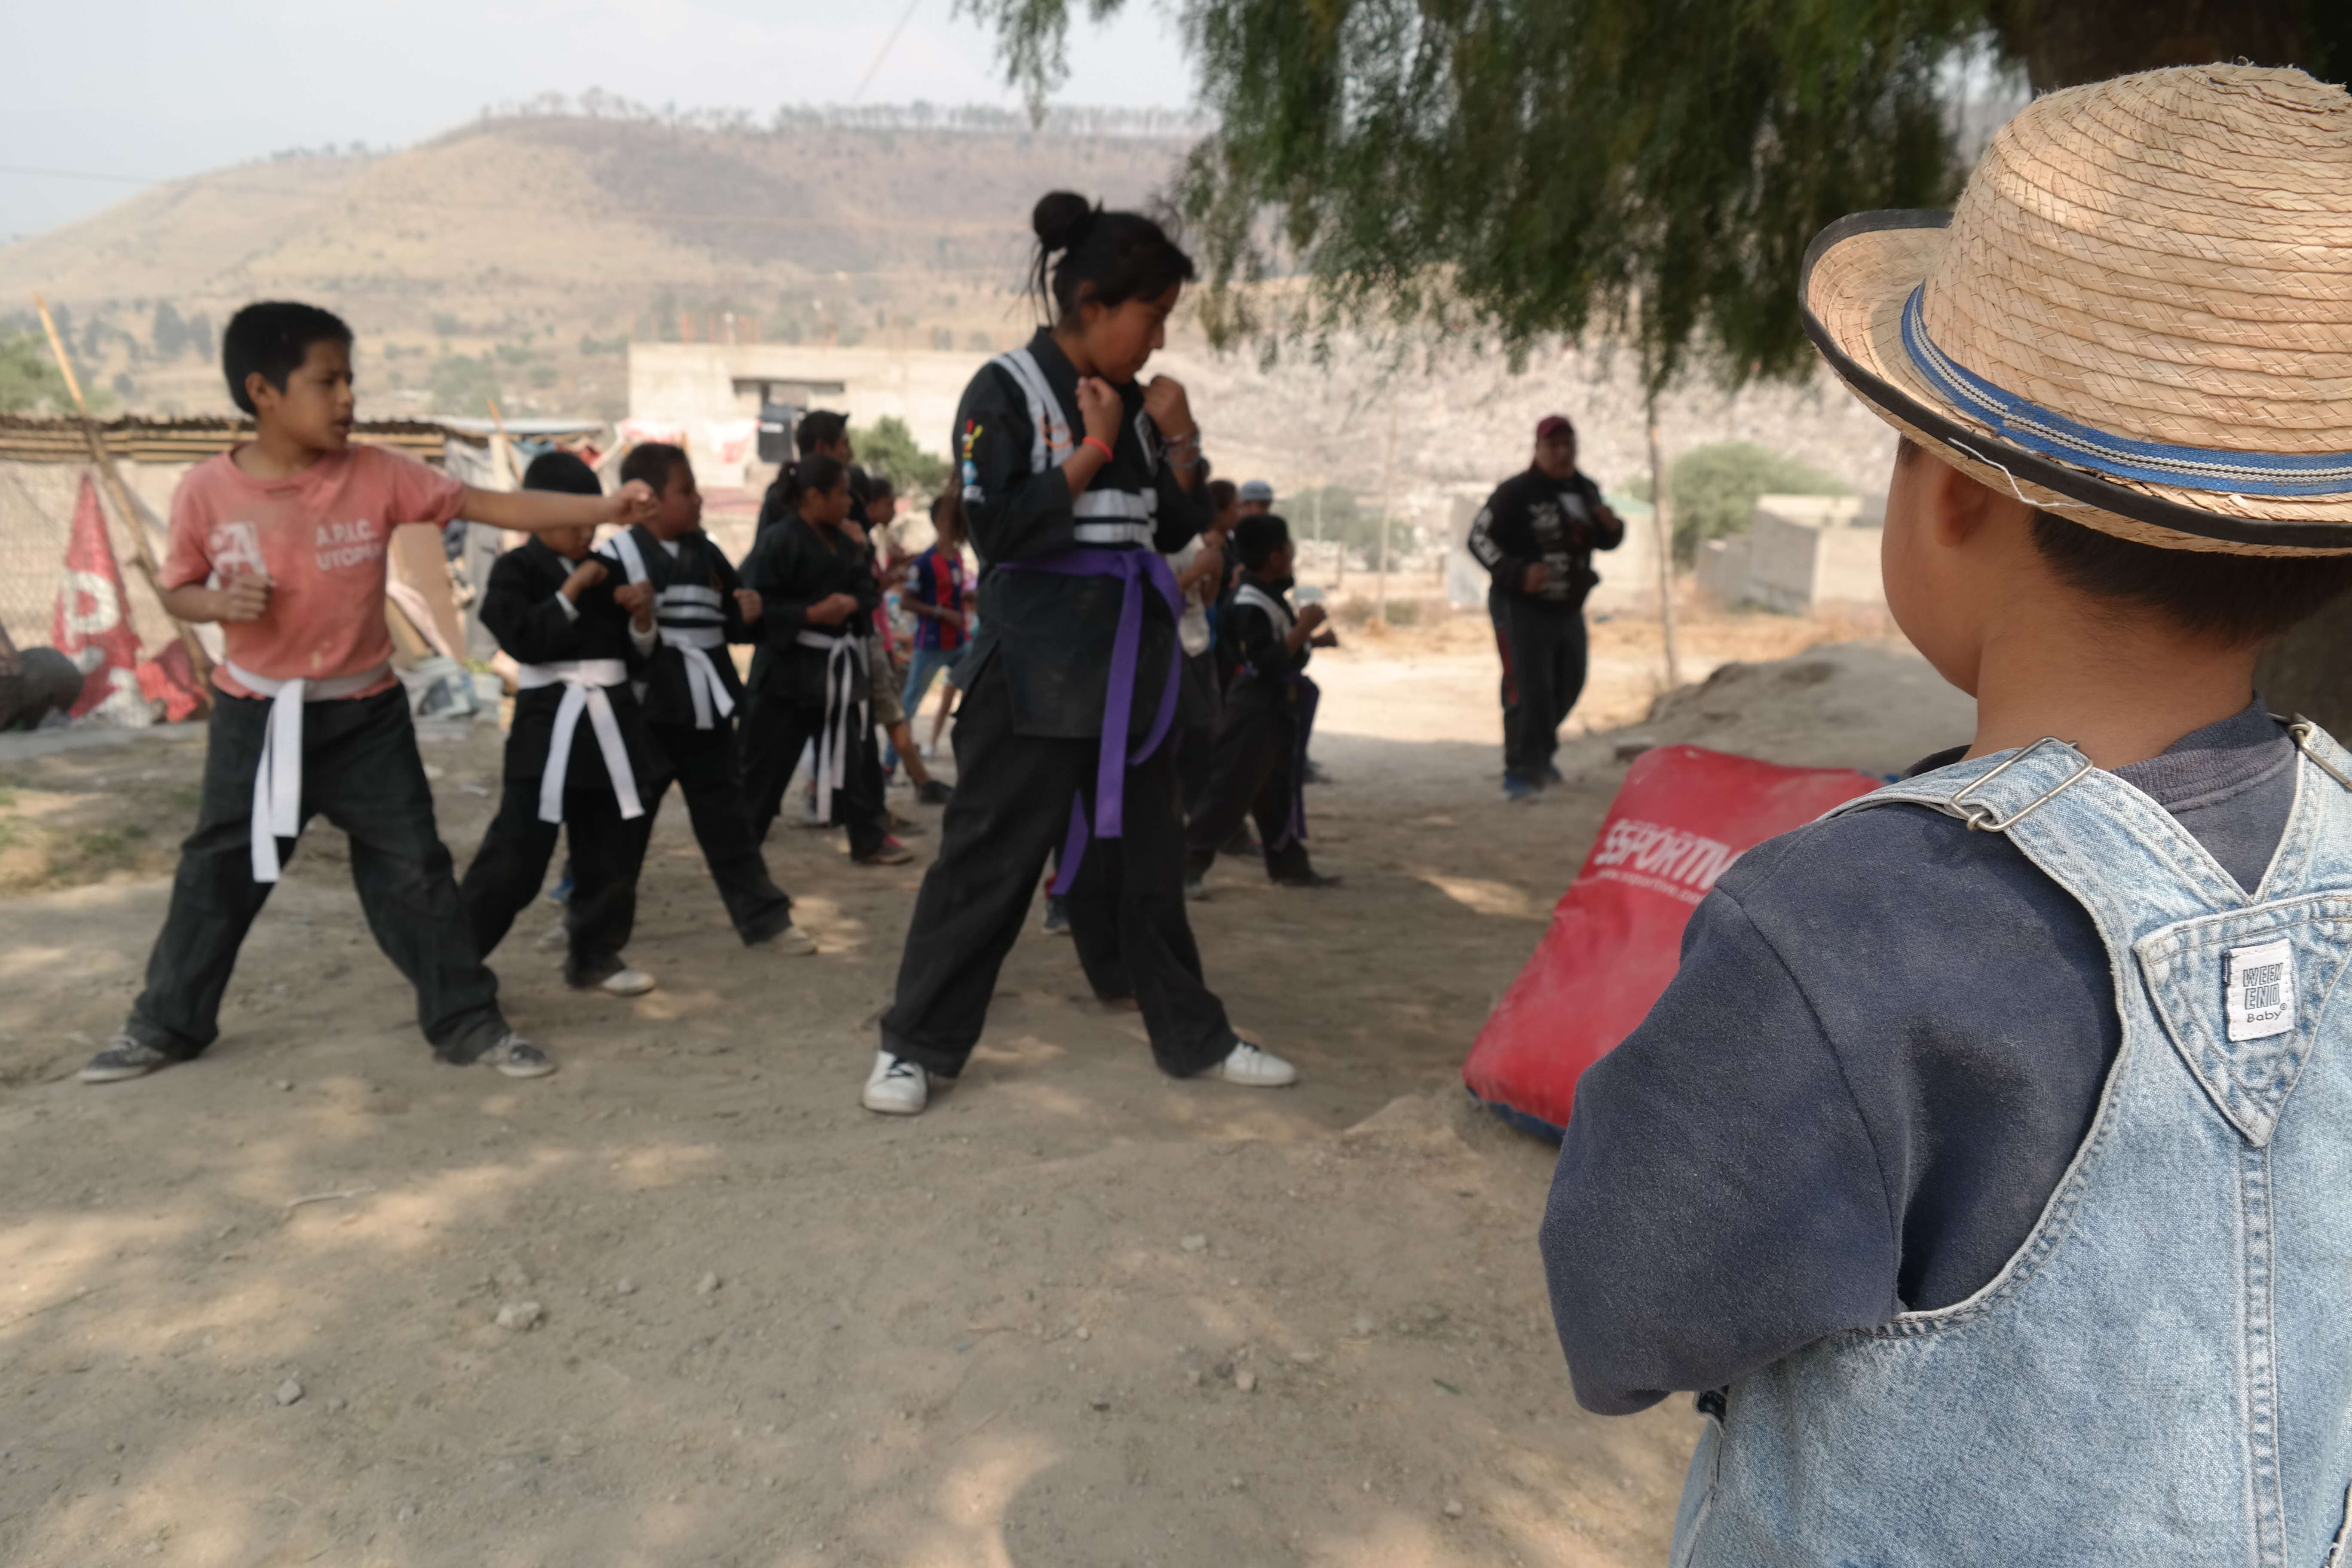 Young boy from the community watching other youth practice martial arts. 